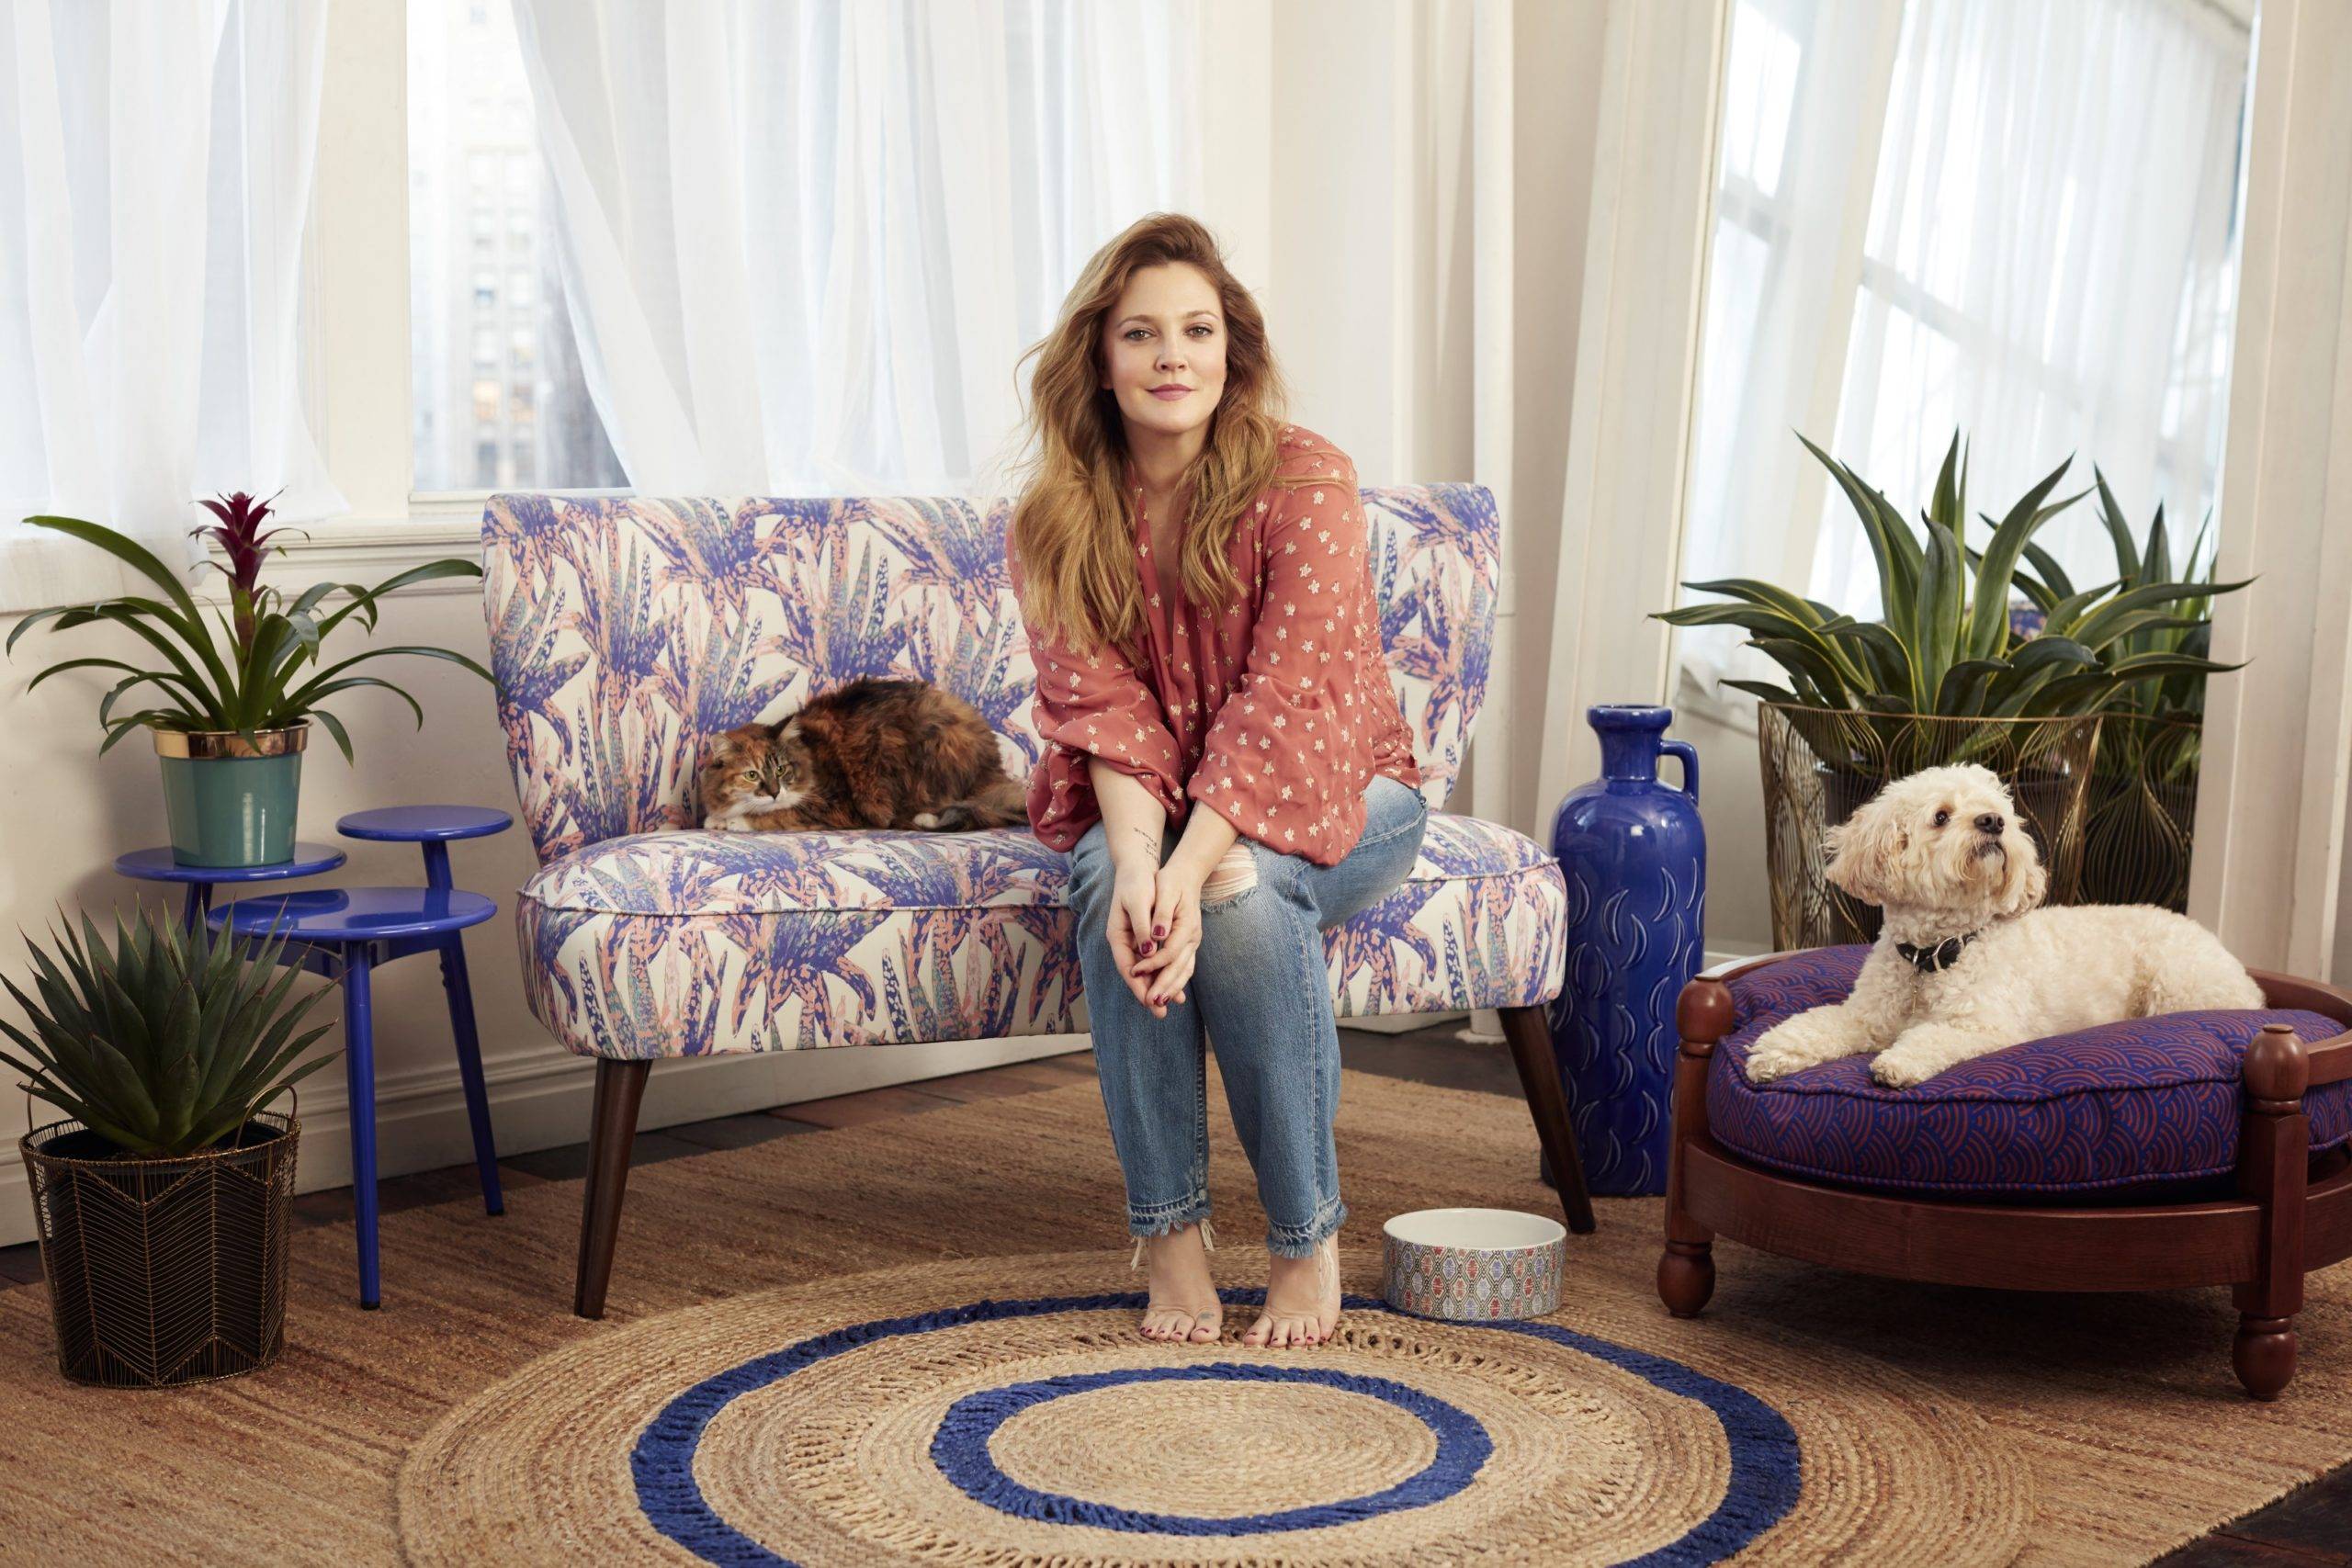 Drew barrymore sitting on a flower sofa with a cat and dog